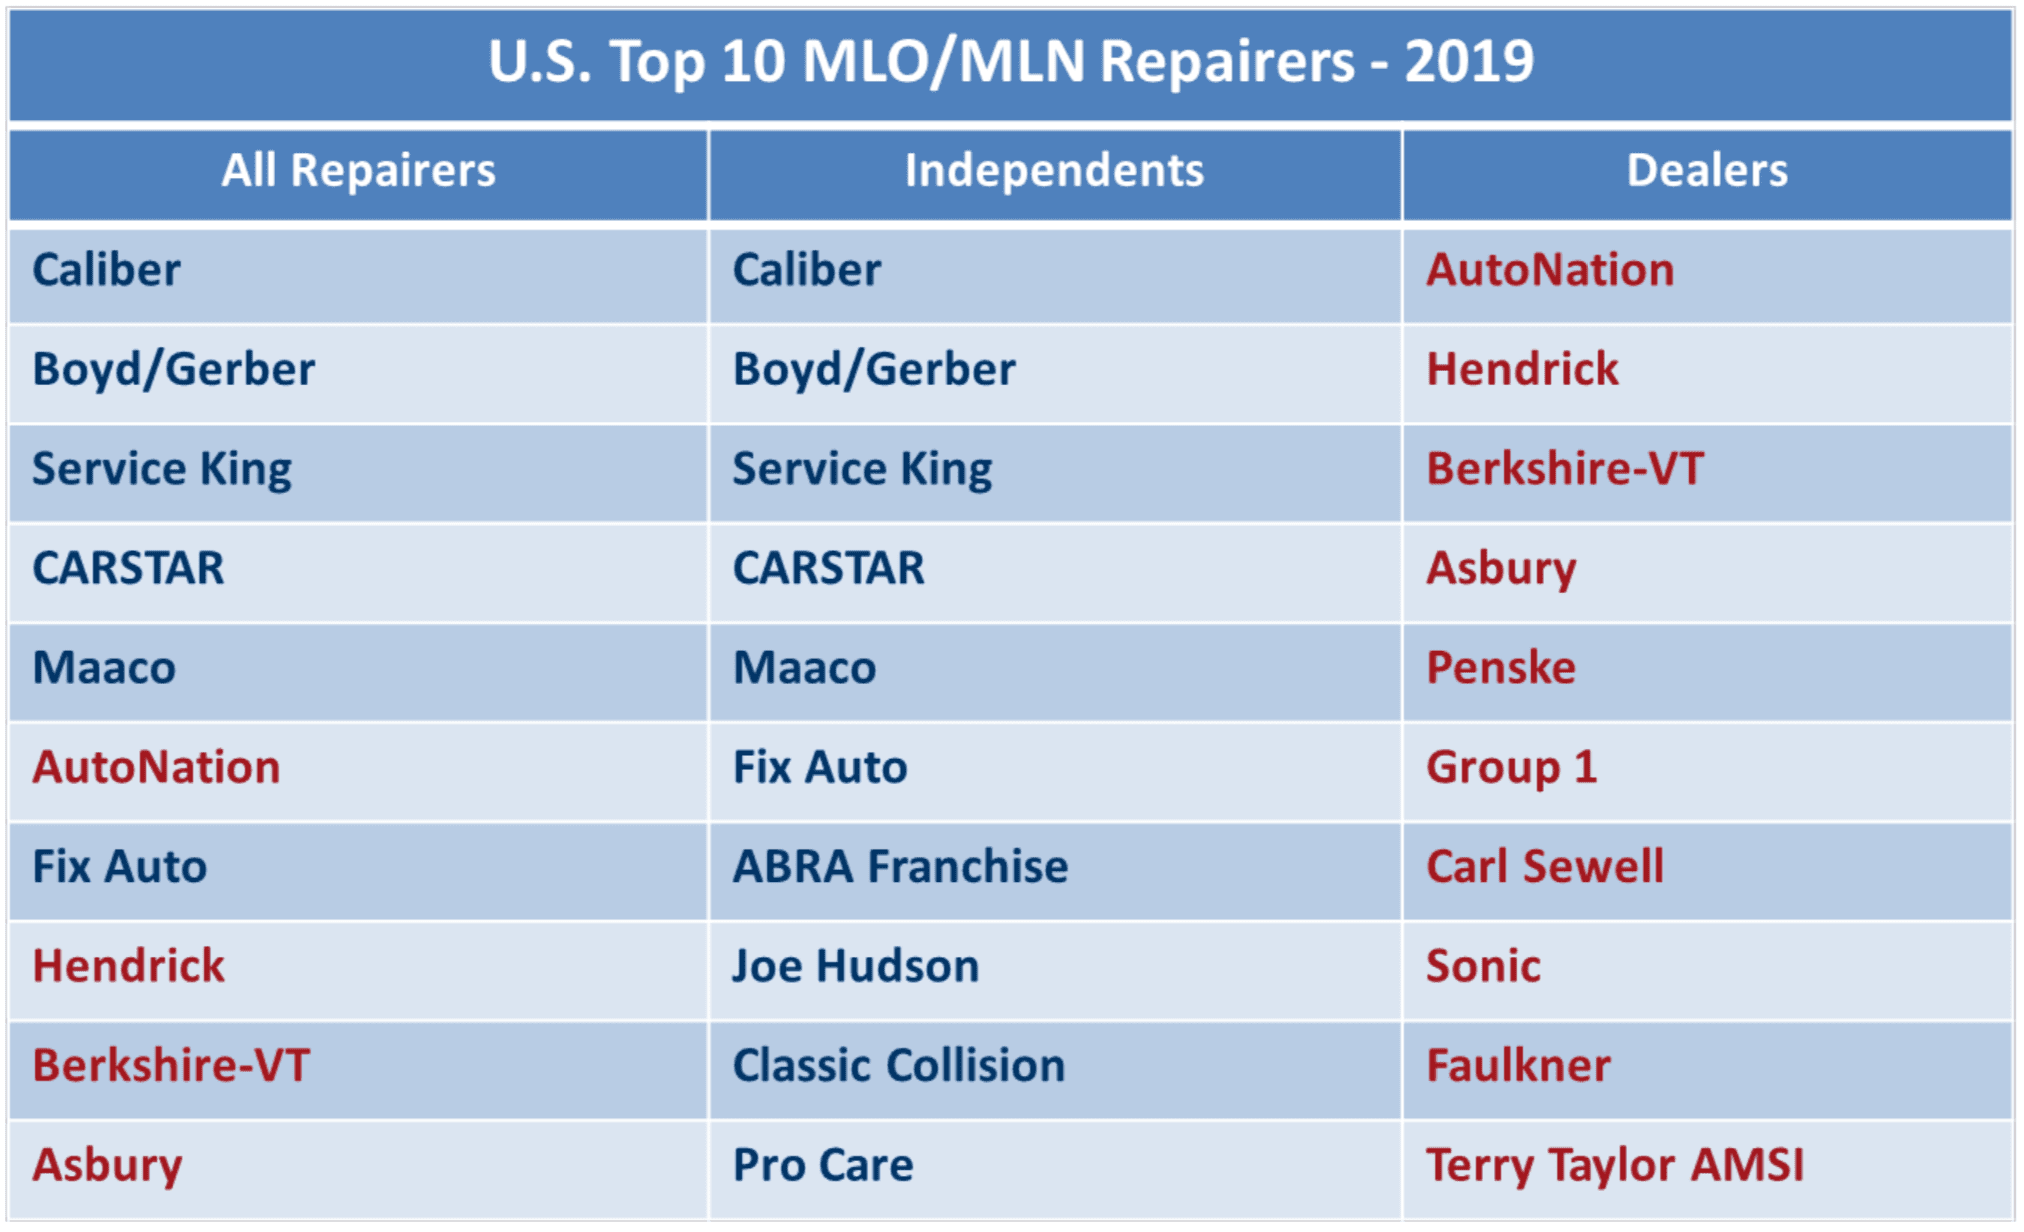 Top 10 U.S MLO/MLN Repairers 2019